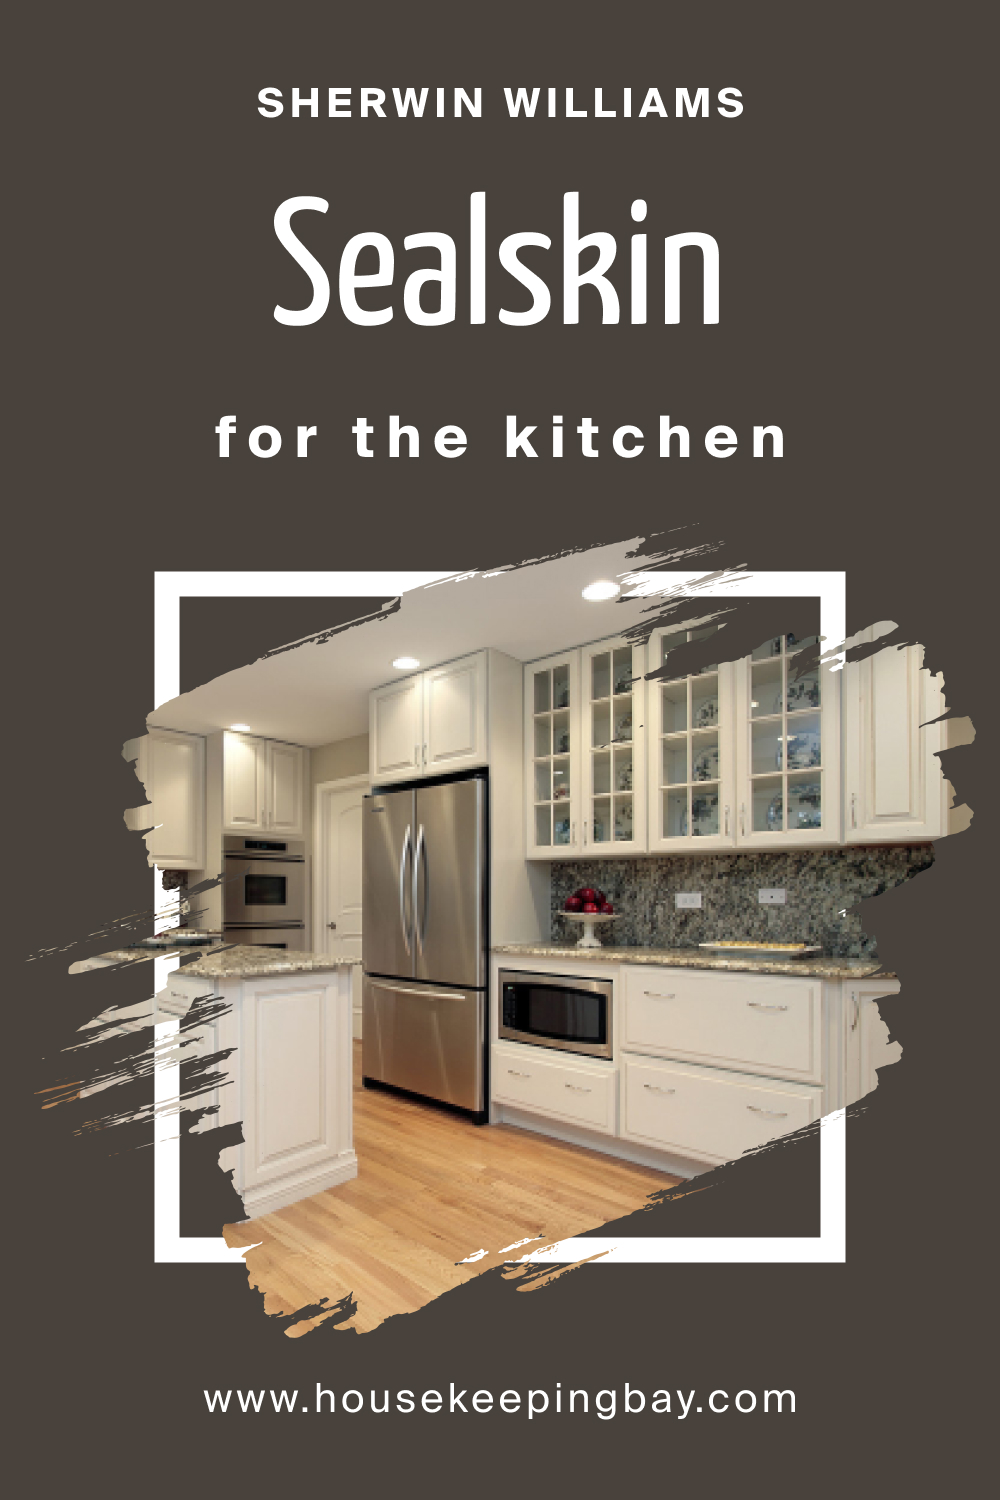 Sherwin Williams. SW 7675 Sealskin For the Kitchens